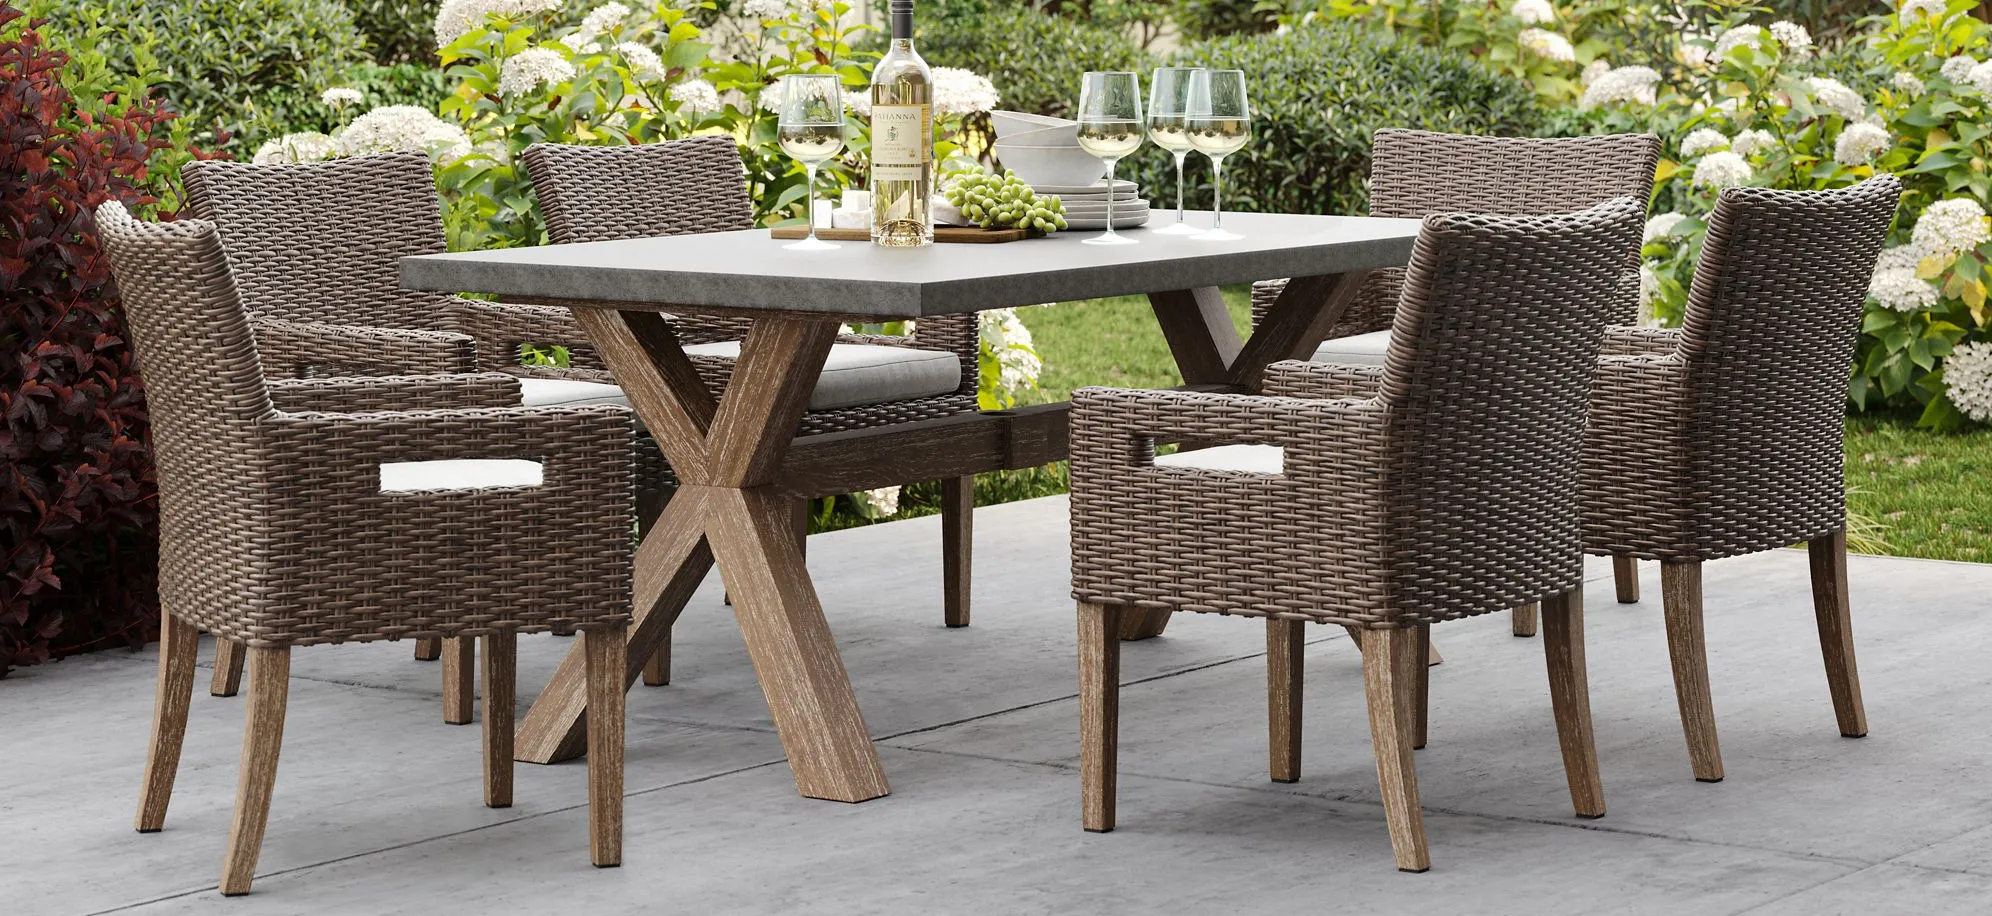 Nautical 7-pc. Wicker and Eucalyptus Rectangle Outdoor Dining Set in Charcoal by Outdoor Interiors